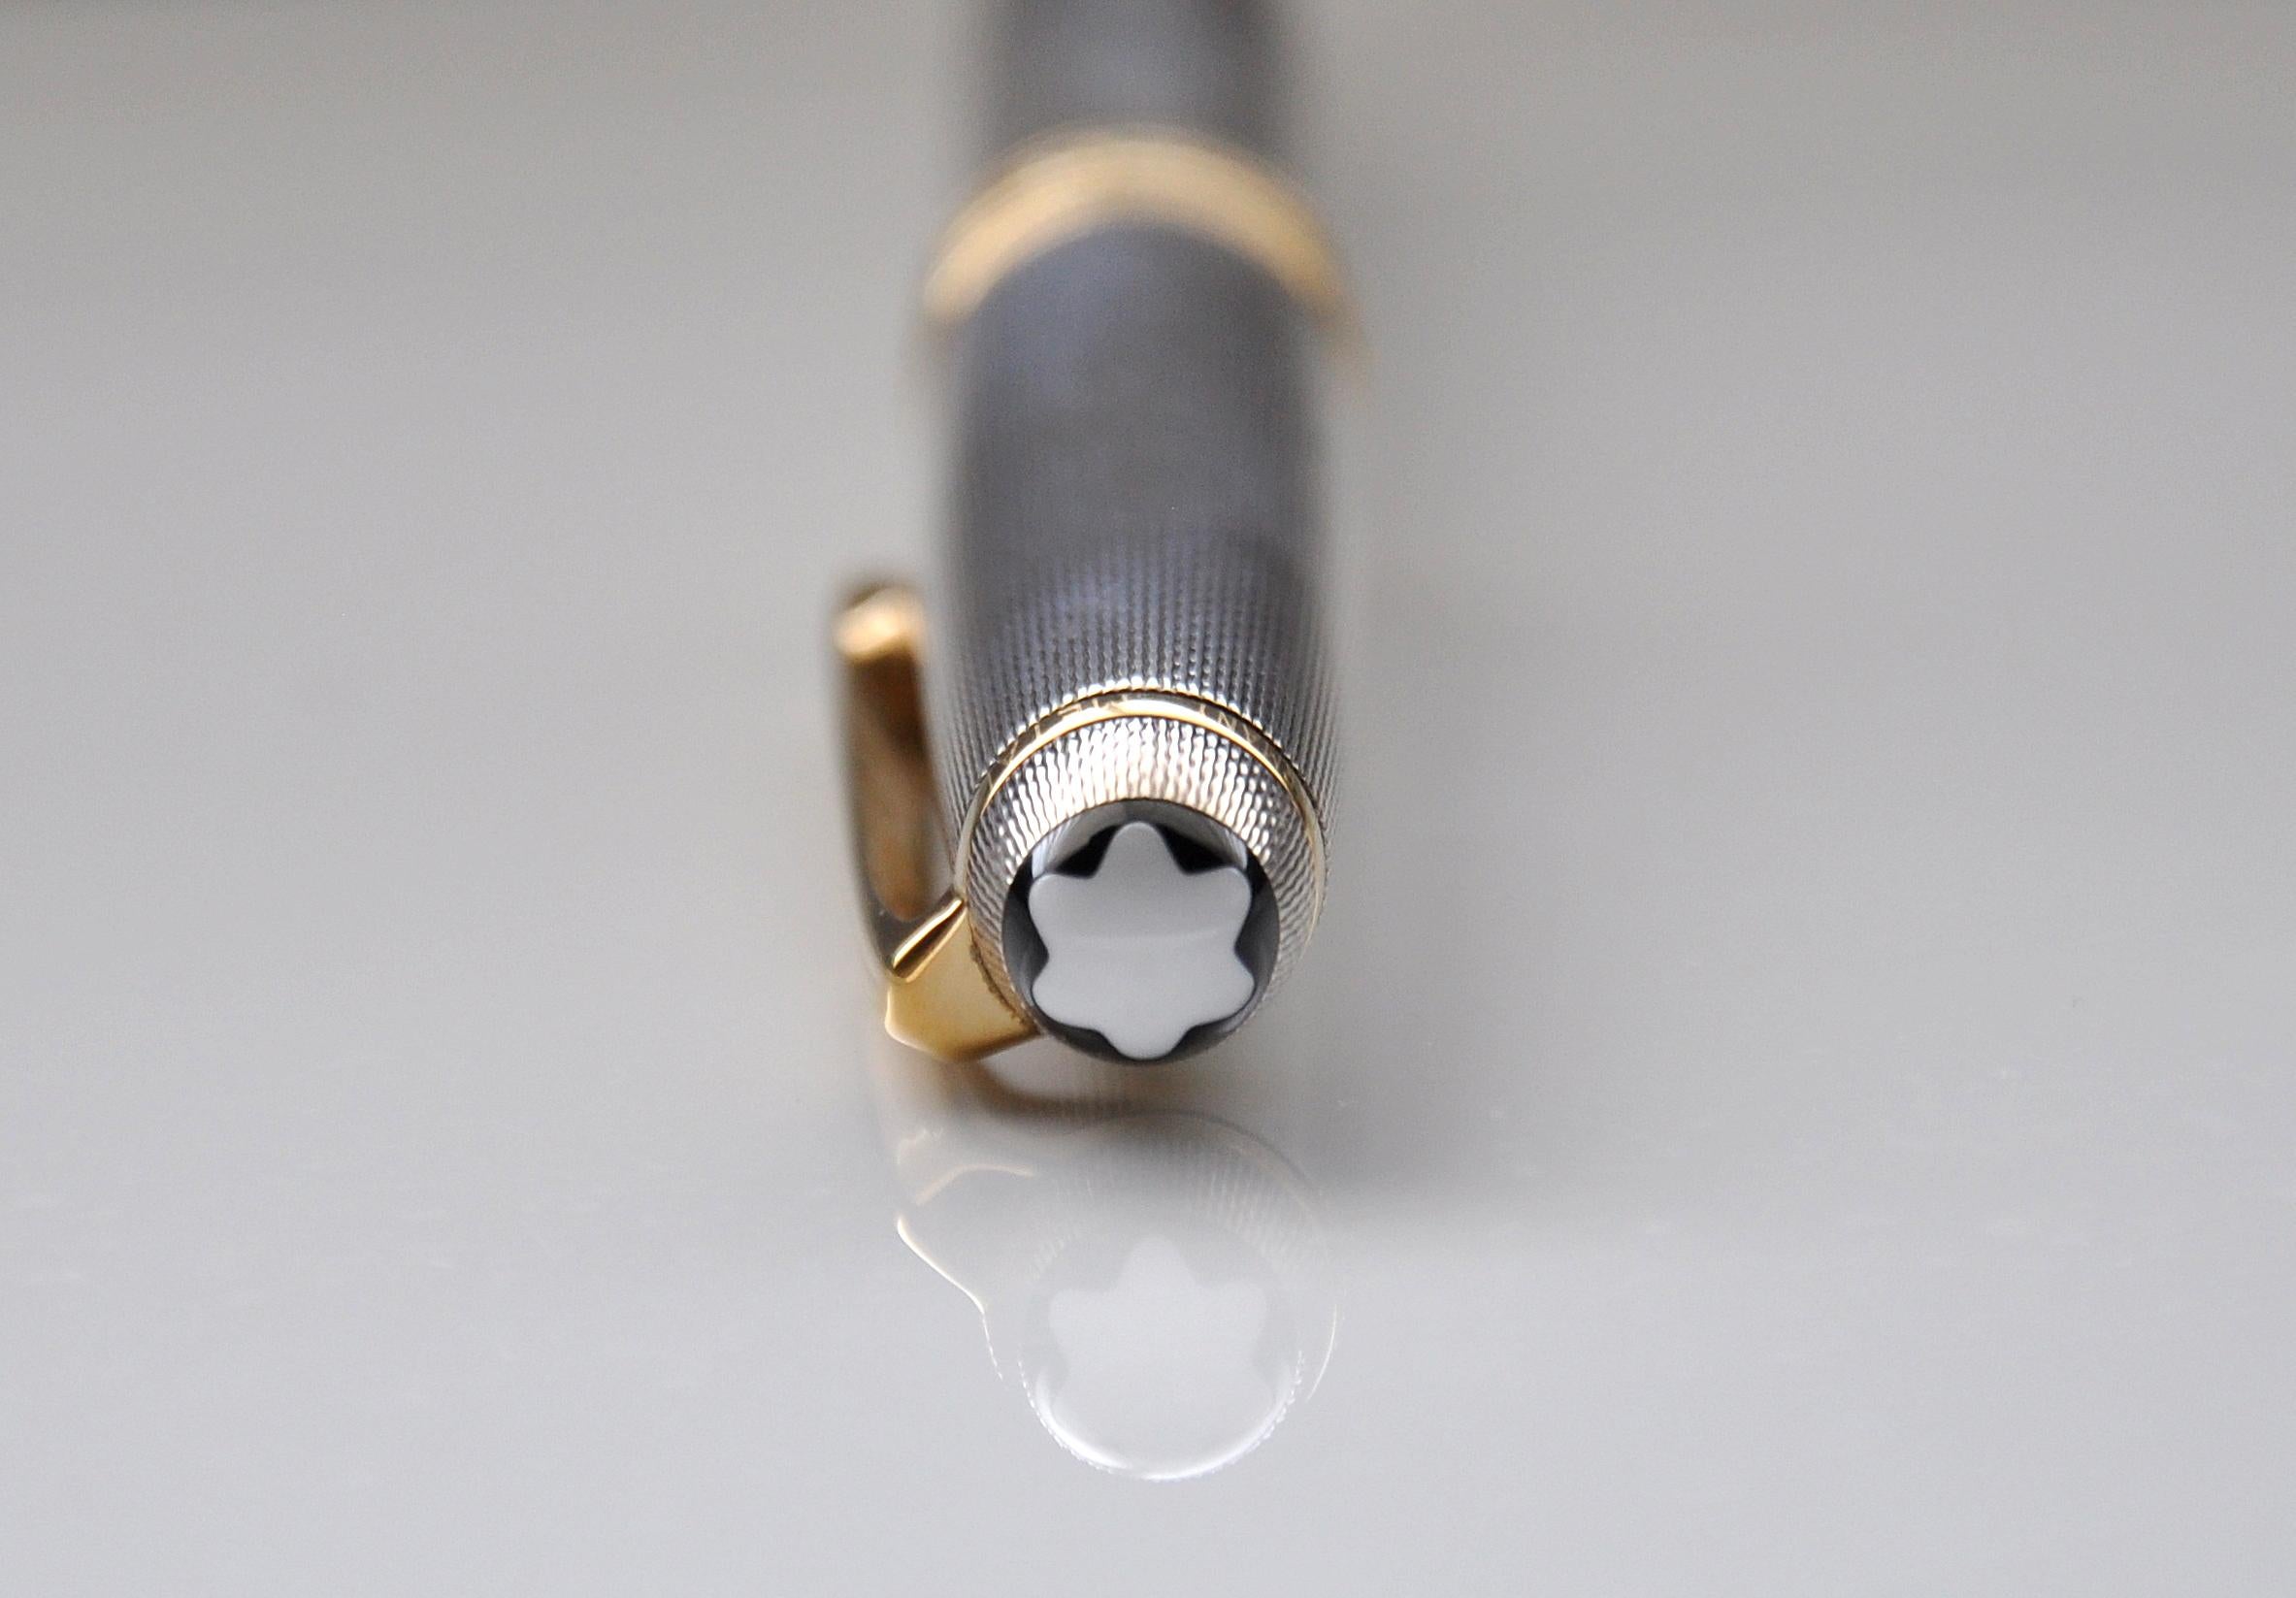 A vintage 925 silver Montblanc Meisterstück 165 mechanical pencil, in the barley corn pattern. The pencil has a mechanical twist mechanism with 0.7 mm lead. The barrel and cap of this pencil are made of 925 sterling silver and feature a guilloche